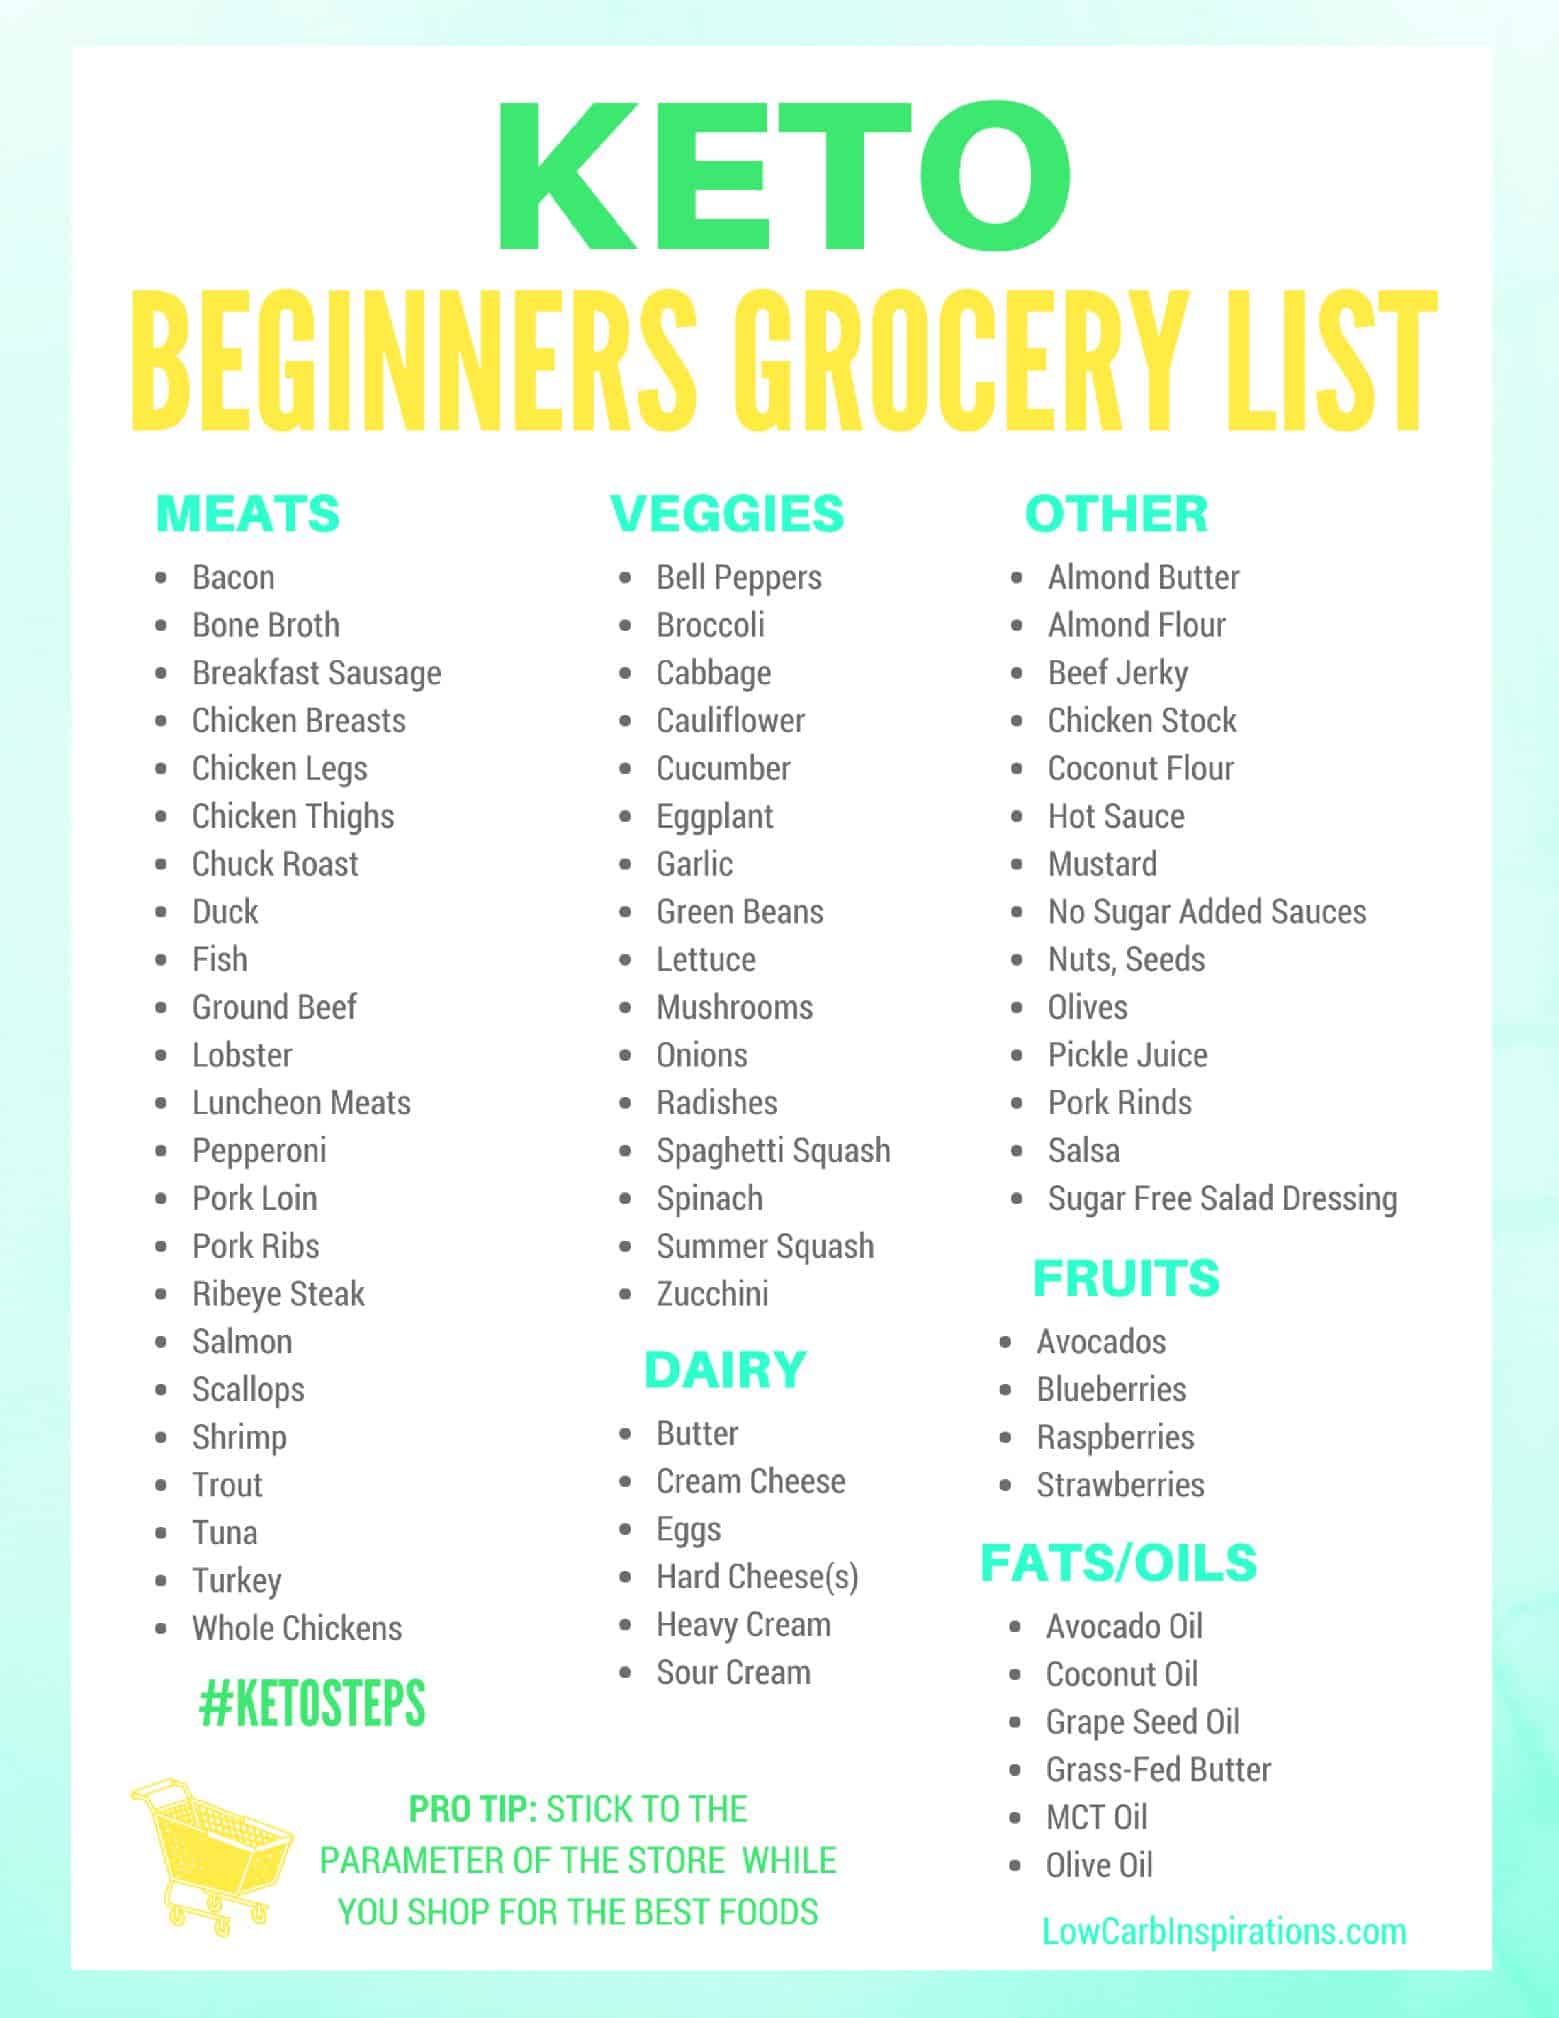 15 Delightful Keto for Beginners Grocery List Best Product Reviews